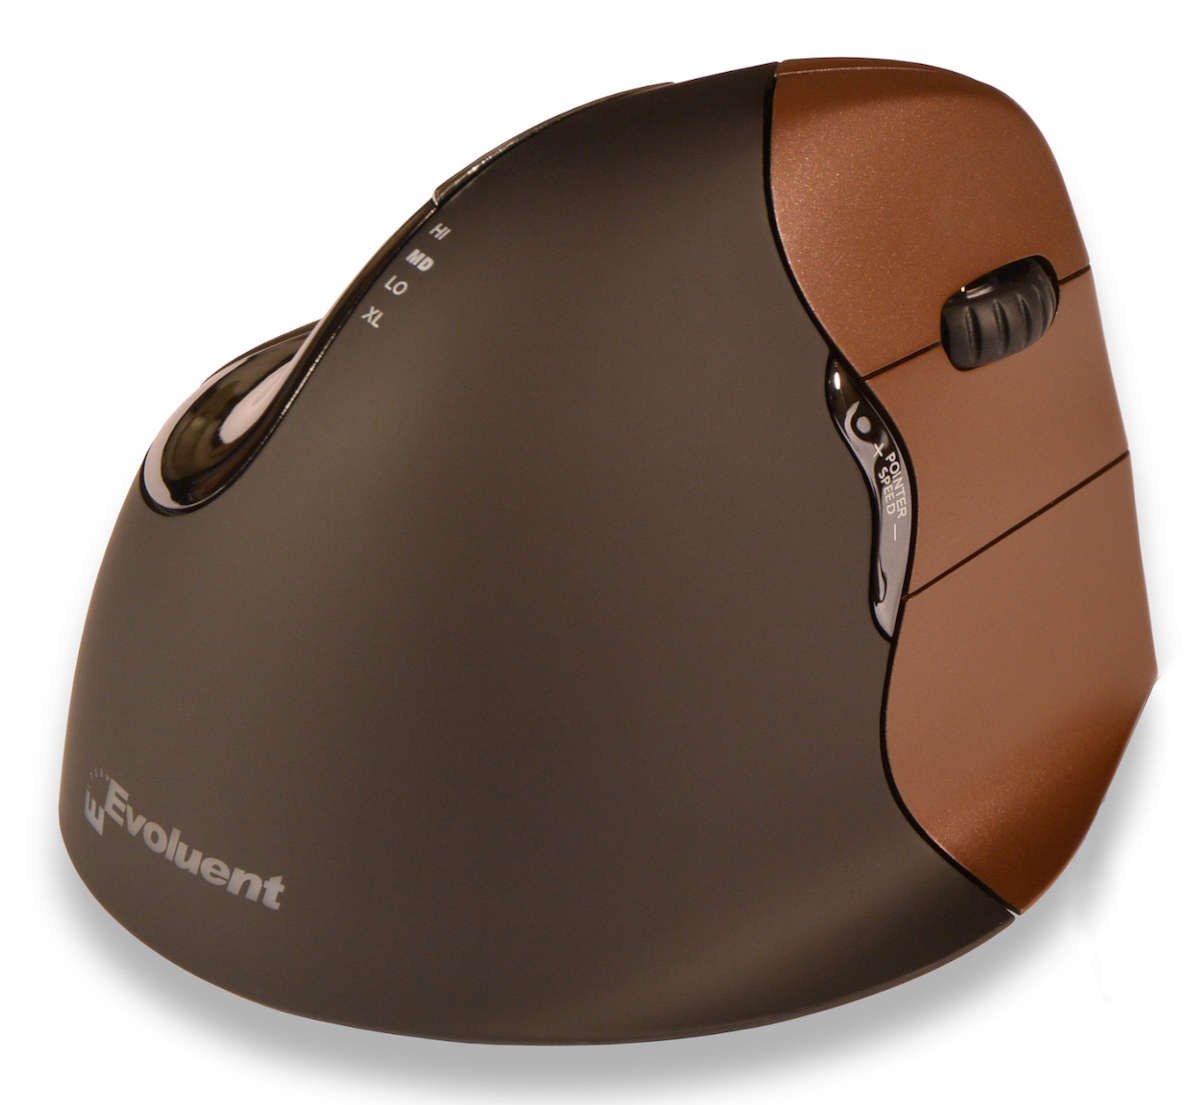 Evoluent Vertical Mouse 4 Rechts small, wireless